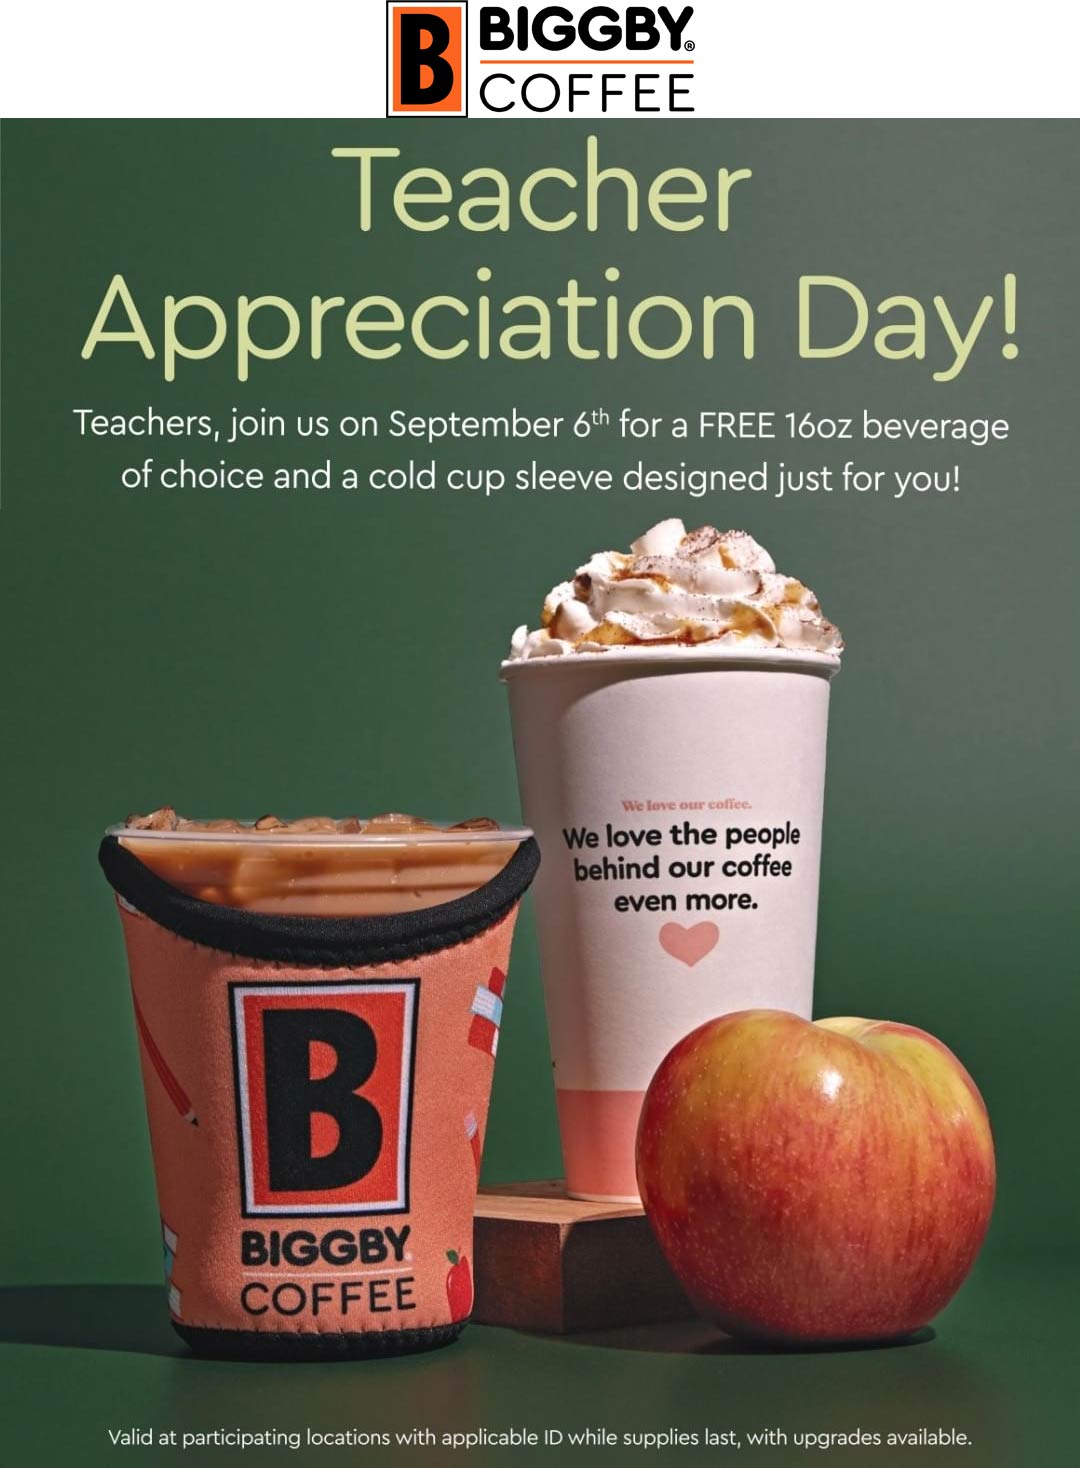 Biggby Coffee coupons & promo code for [November 2022]